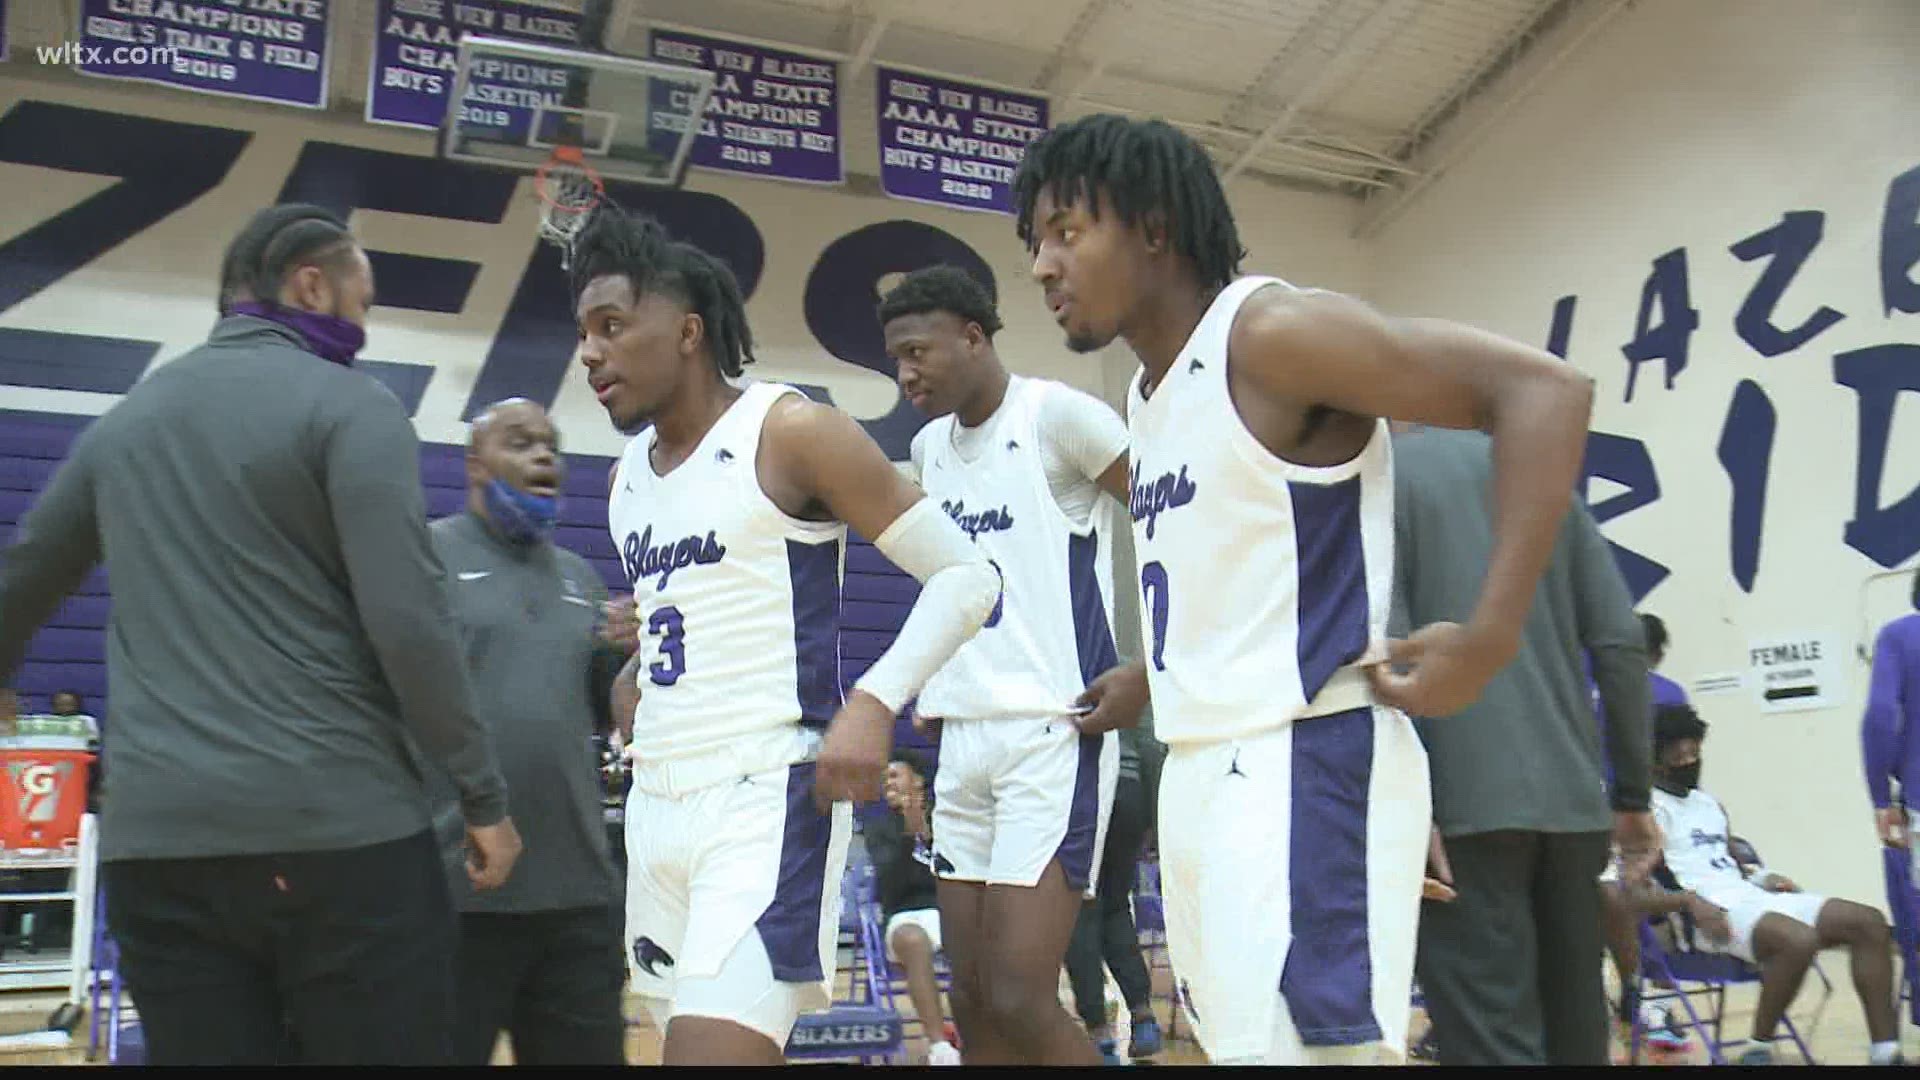 Ridge View earns a sweep of its doubleheader with Northwestern as the Blazer basketball teams make their Region IV-AAAAA debut.